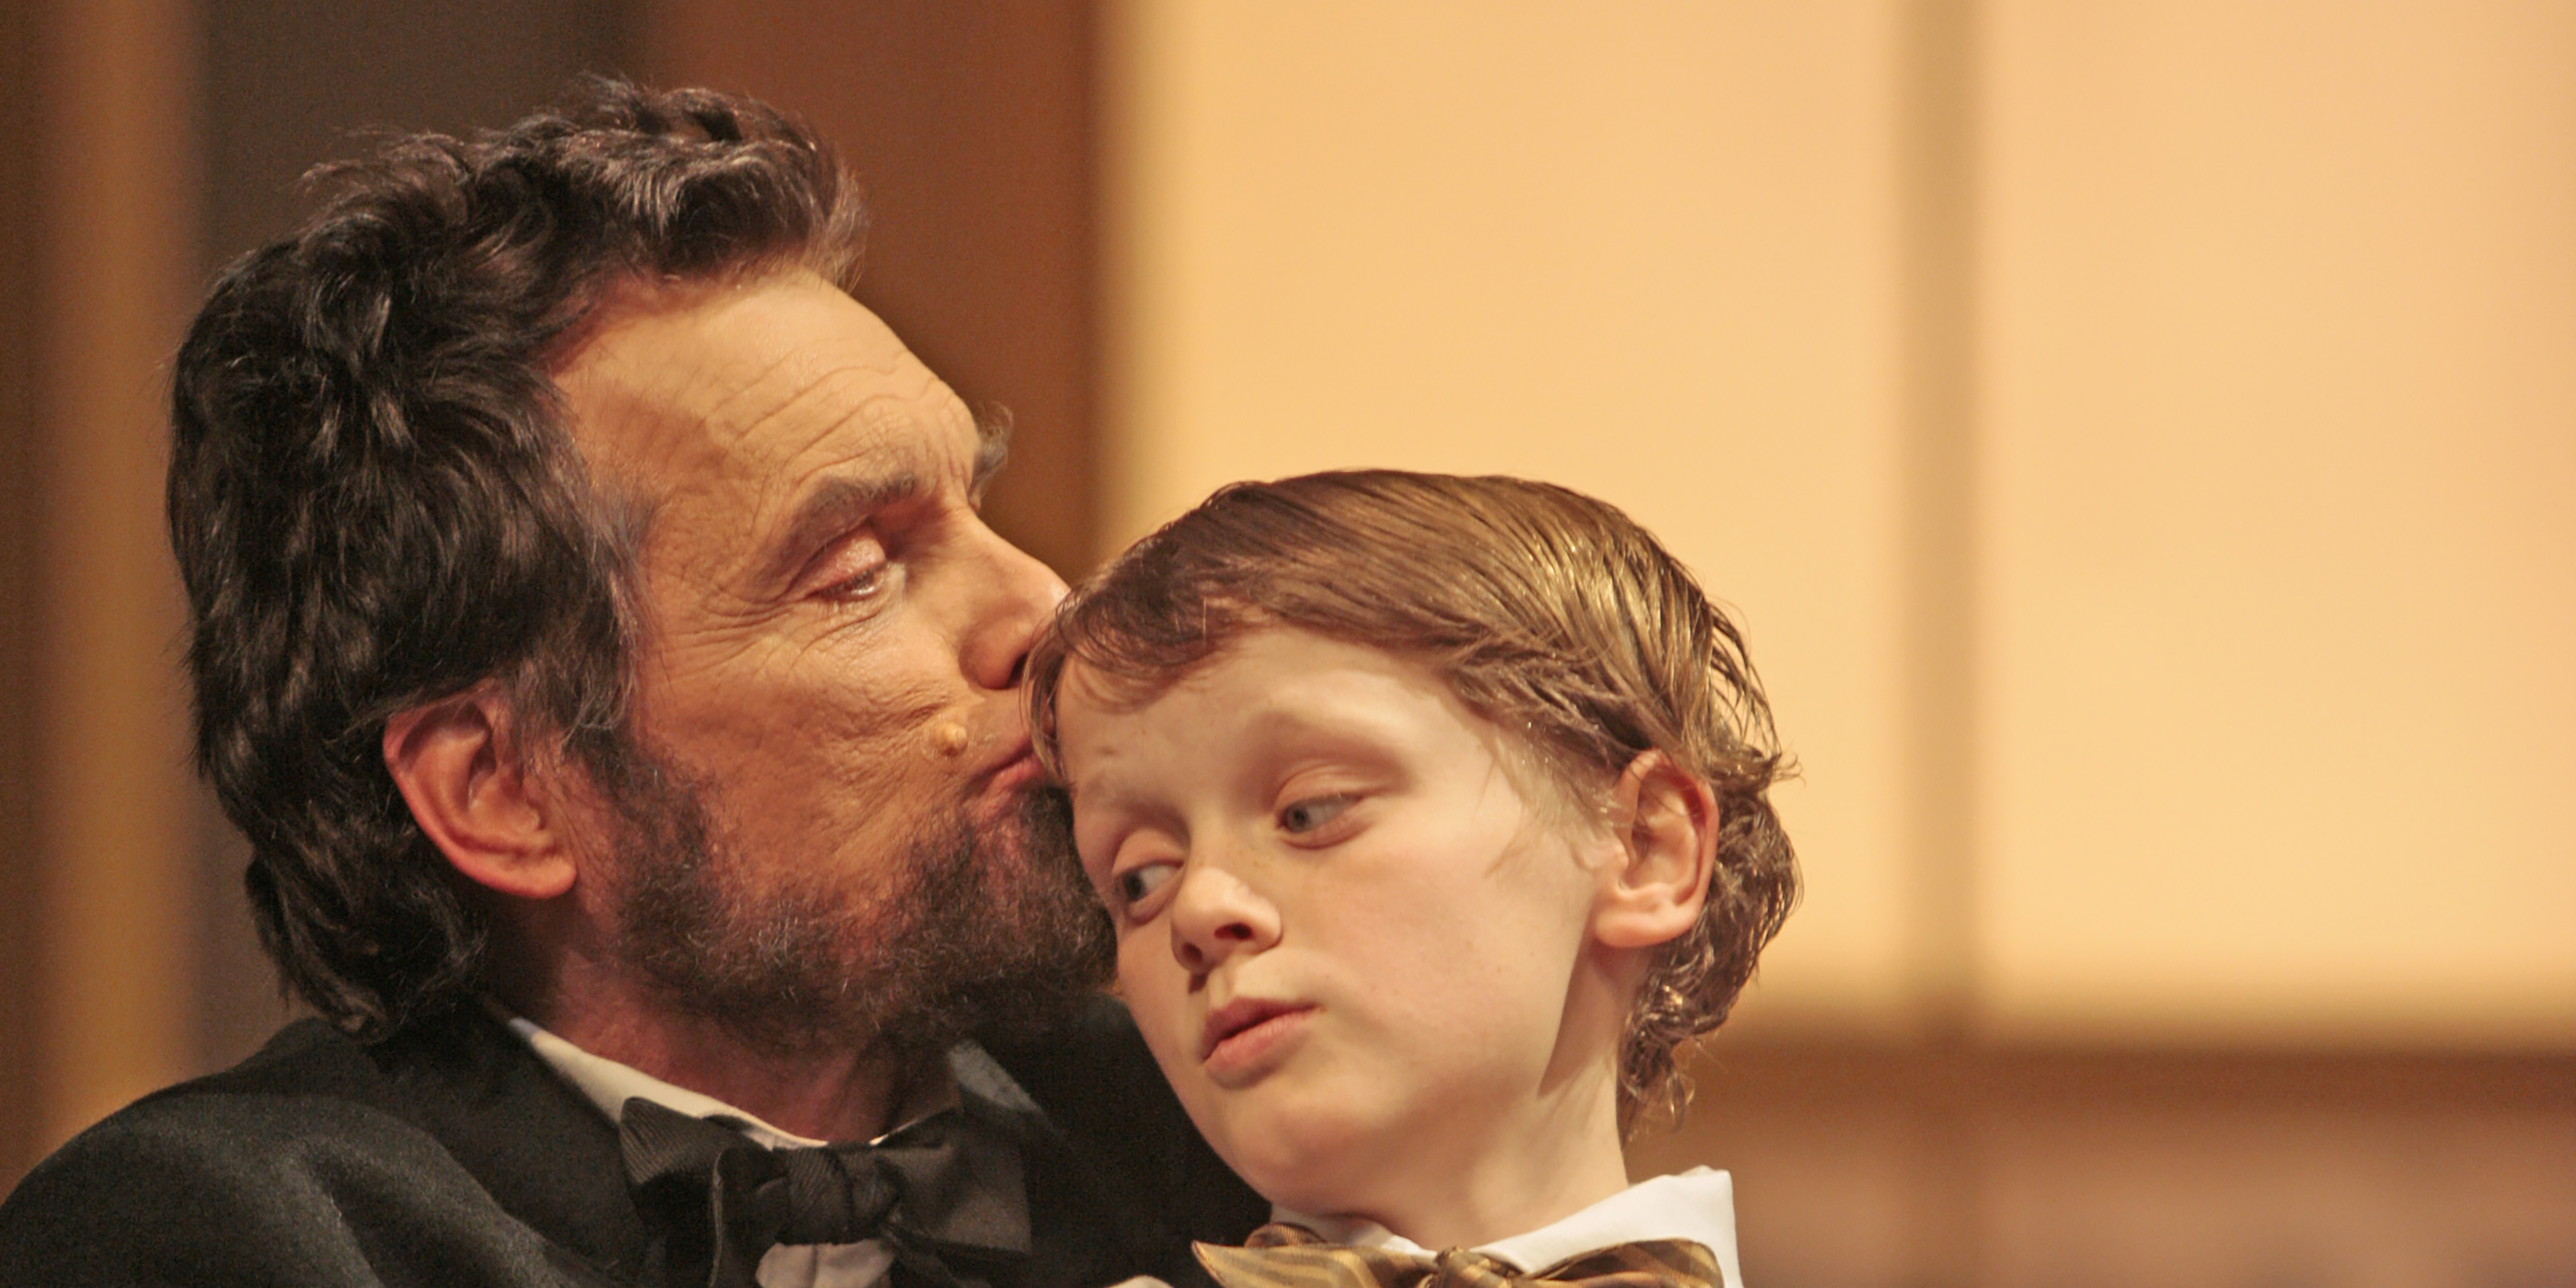 An actor portraying Abraham Lincoln holds an actor portraying his young son and kisses his forehead.